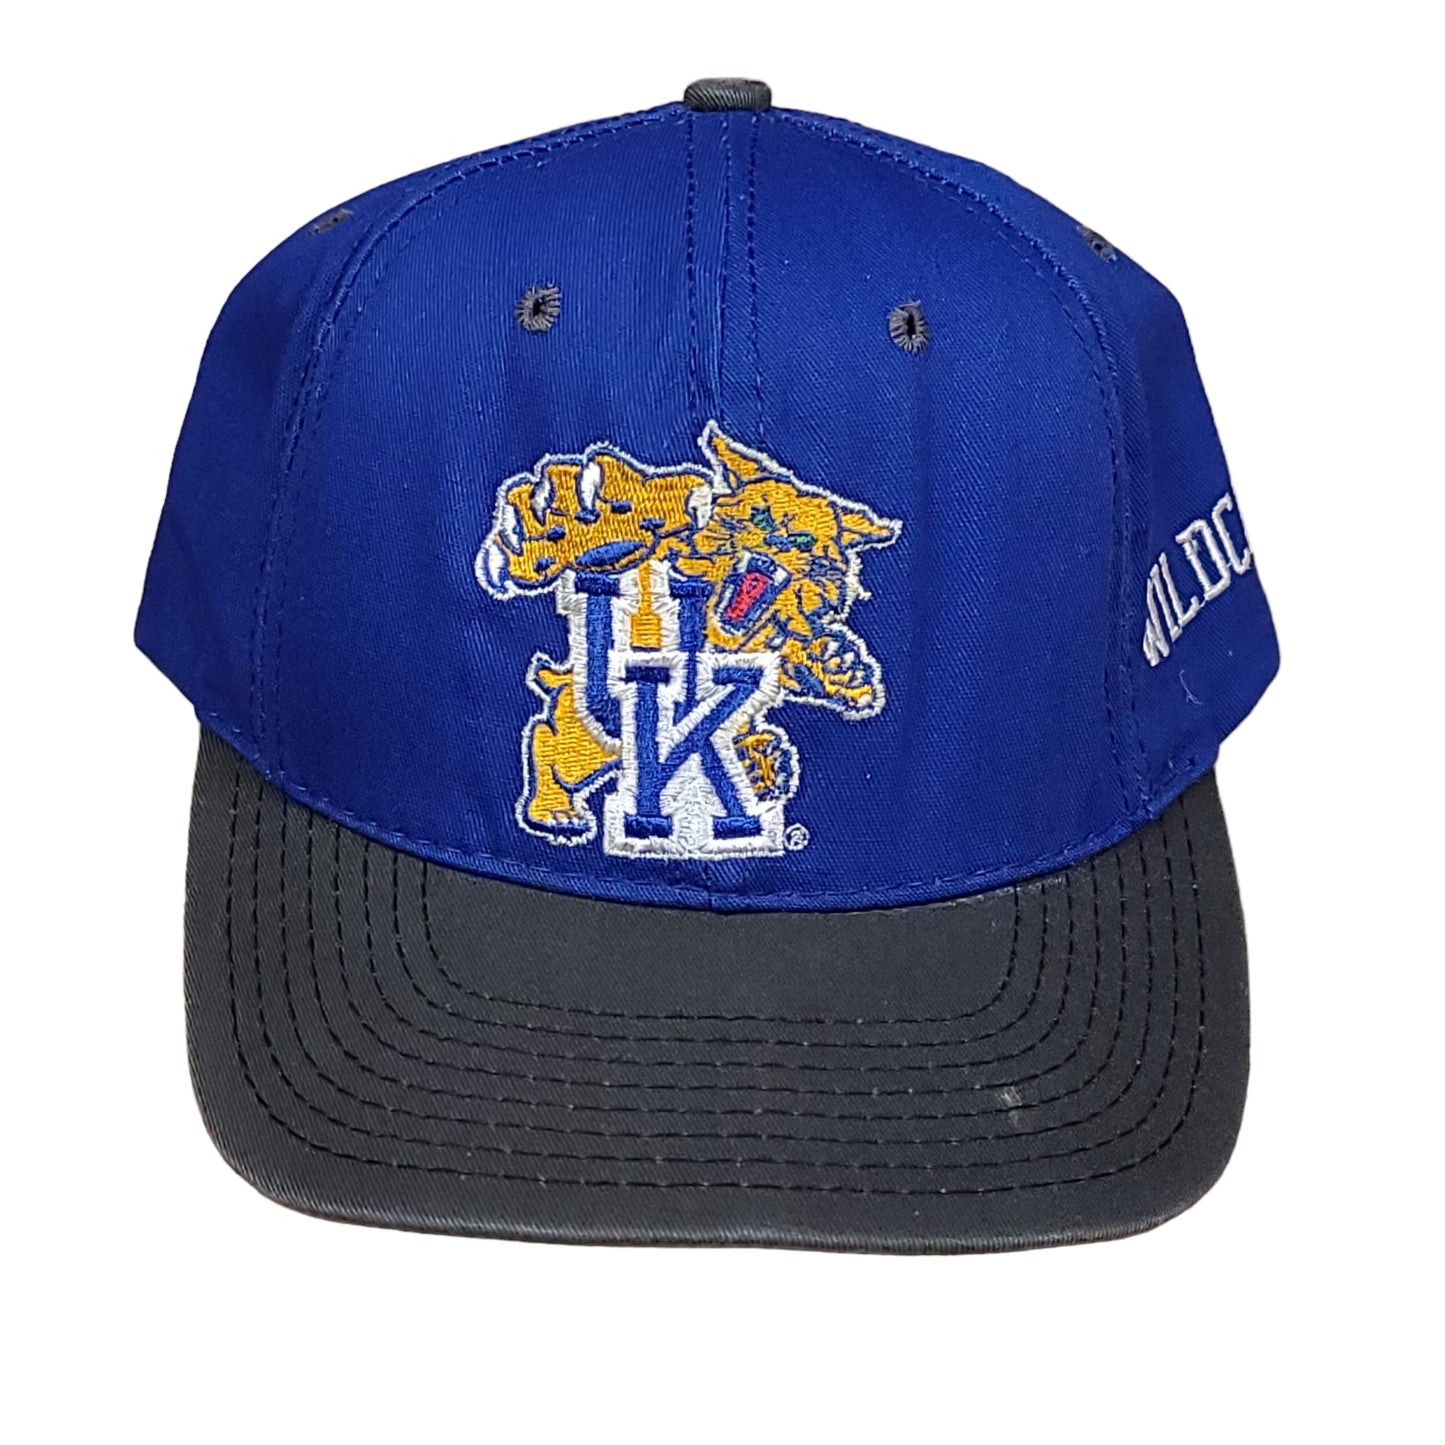 VIntage University of Kentucky Wildcats 7 Fitted Hat